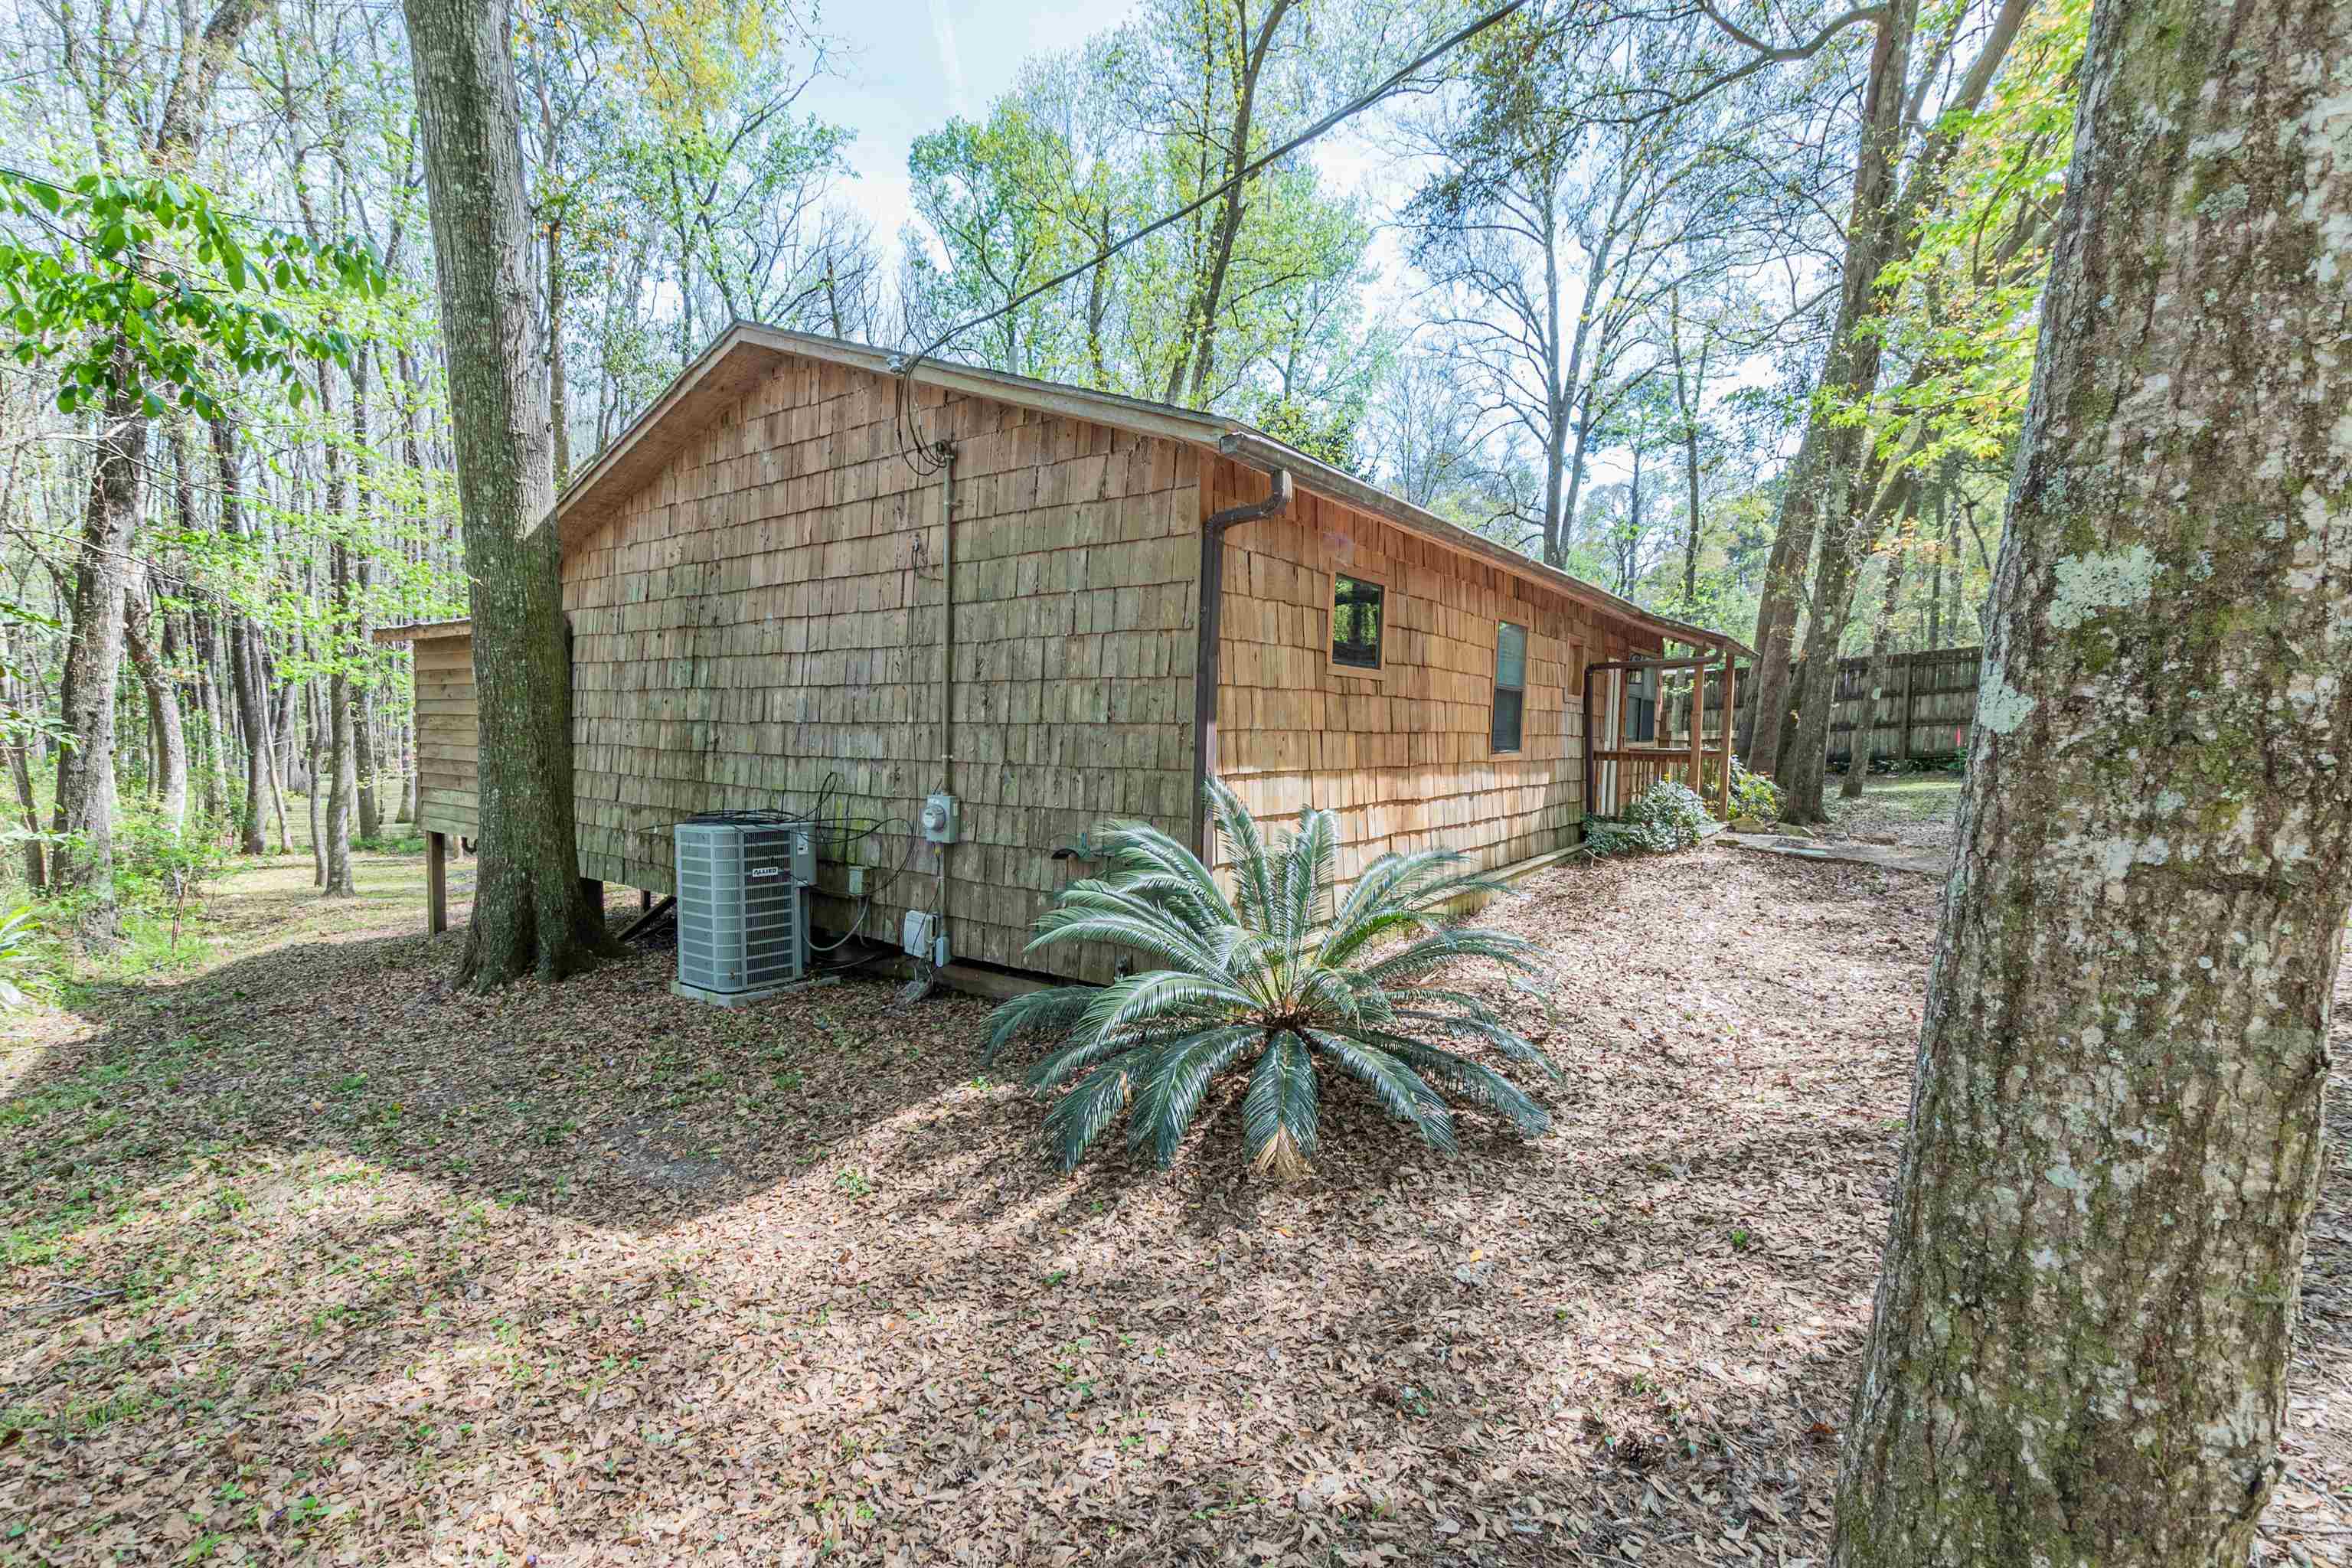 4859 Easy Court,TALLAHASSEE,Florida 32303,2 Bedrooms Bedrooms,2 BathroomsBathrooms,Detached single family,4859 Easy Court,369796